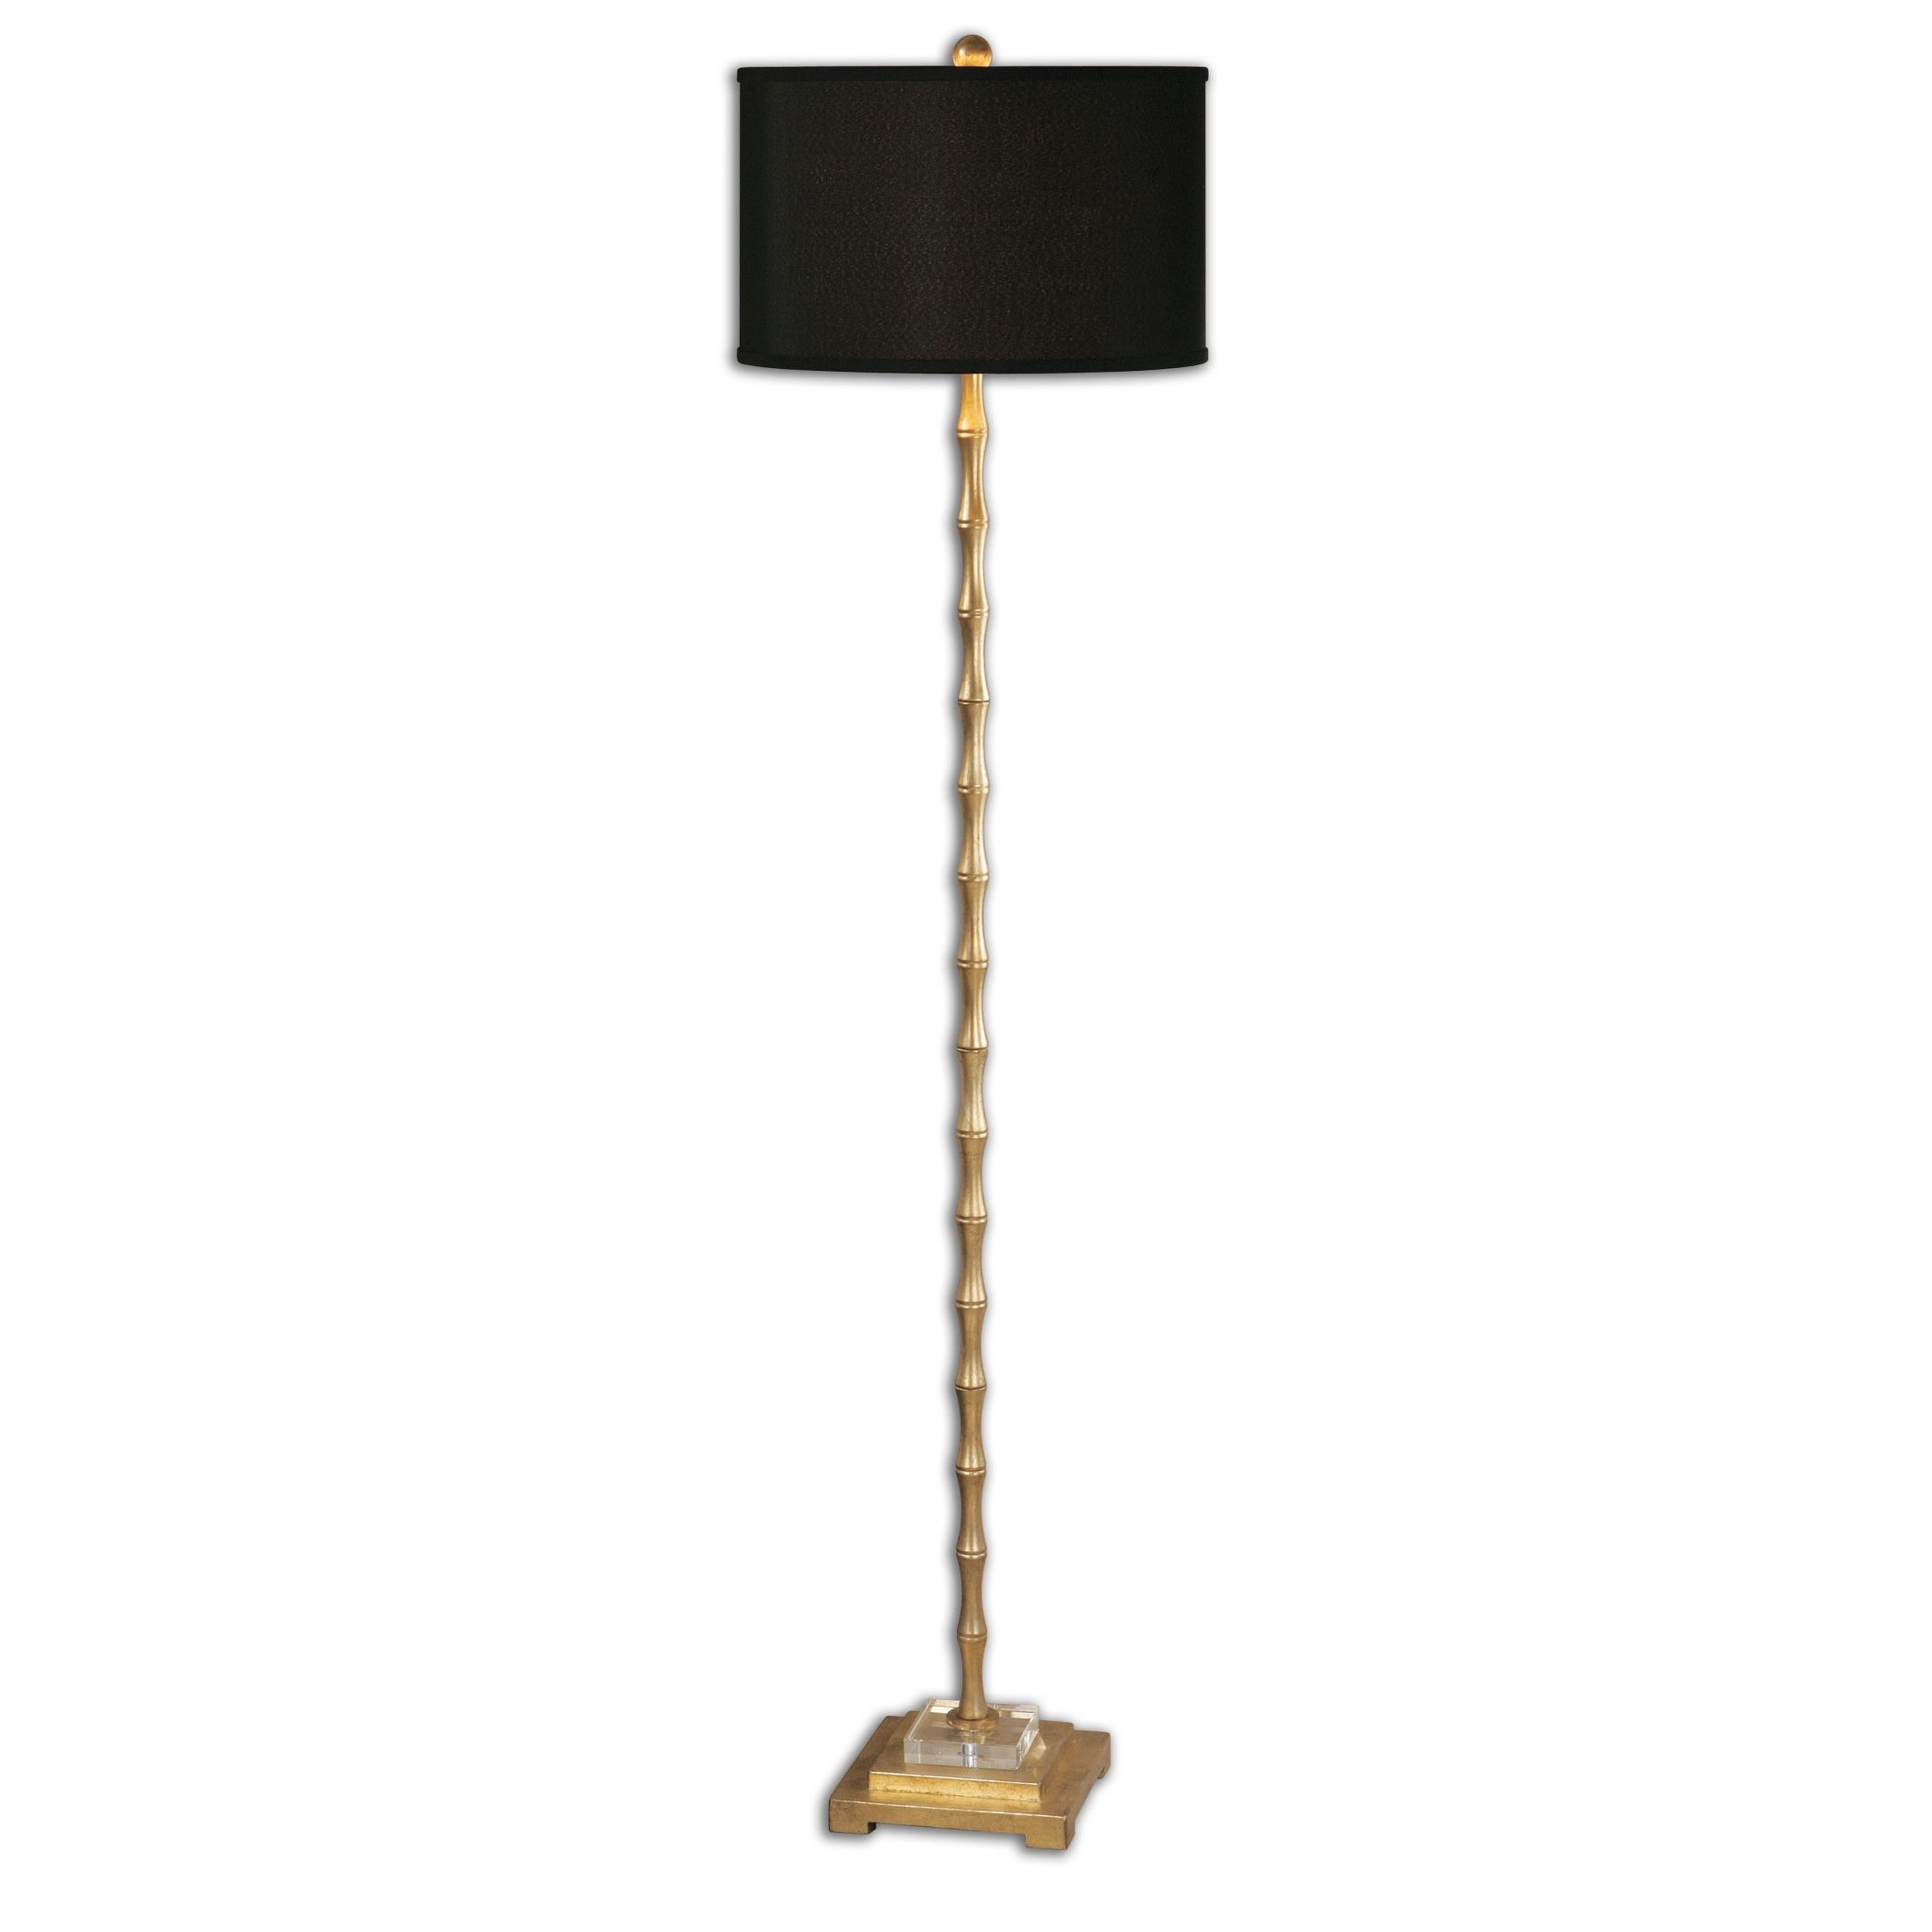 Golden Bamboo Floor Lamp, Black and Gold - Lulu and Georgia